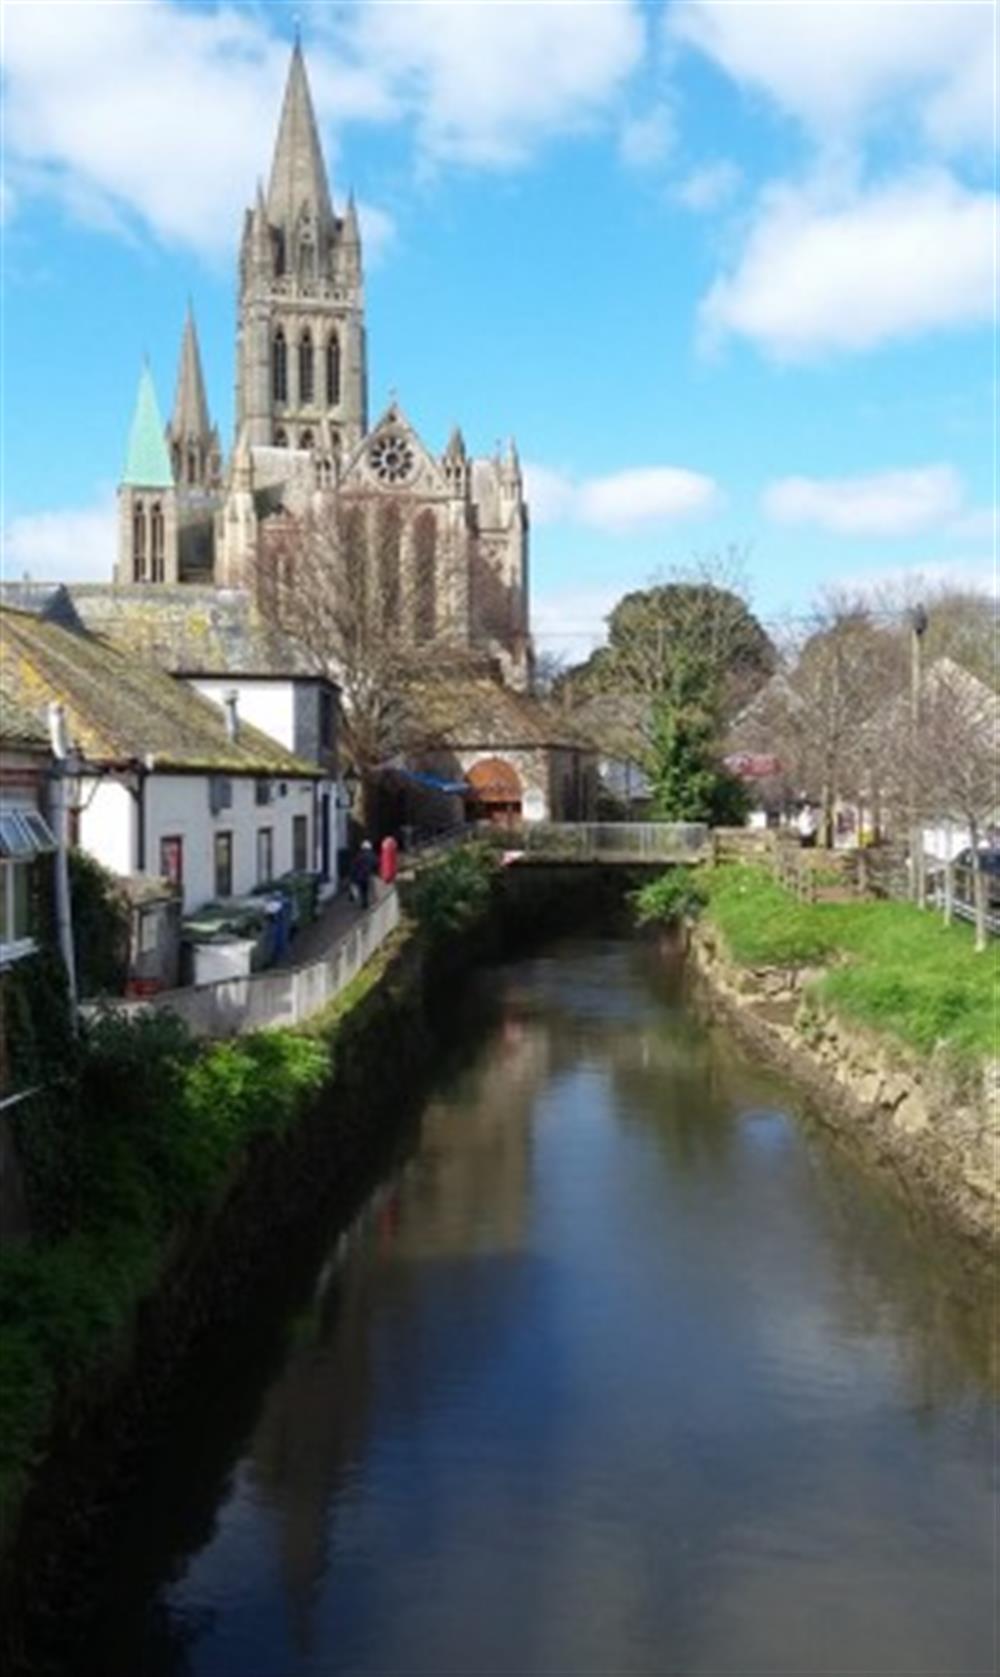 Truro is our main shopping centre, and is easily accessible from Falmouth